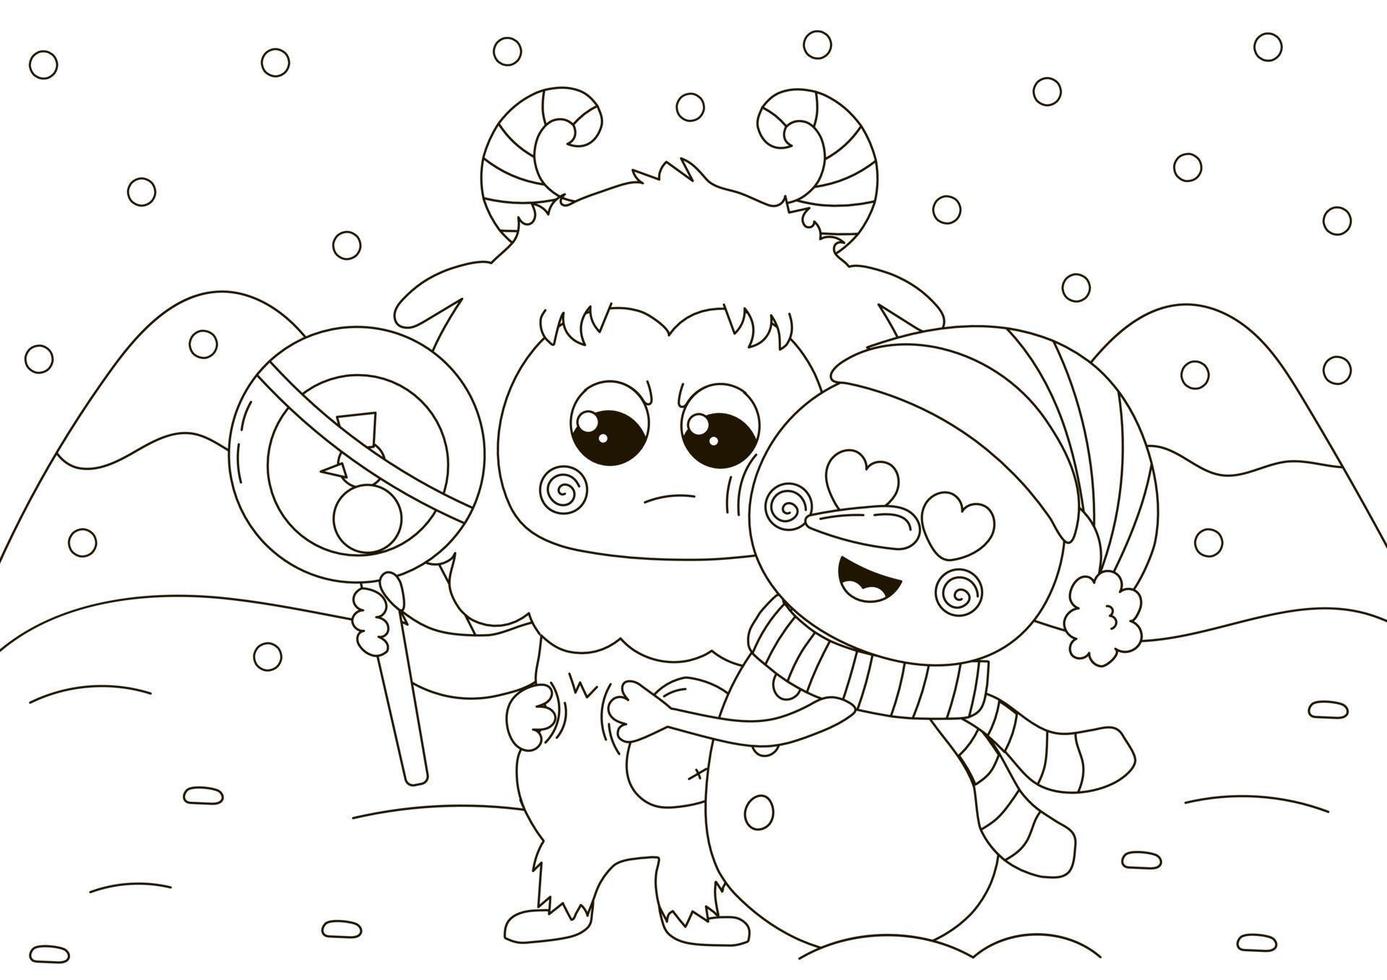 Funny coloring page with cute angry Yeti character holding sign and snowman hugging him, vector